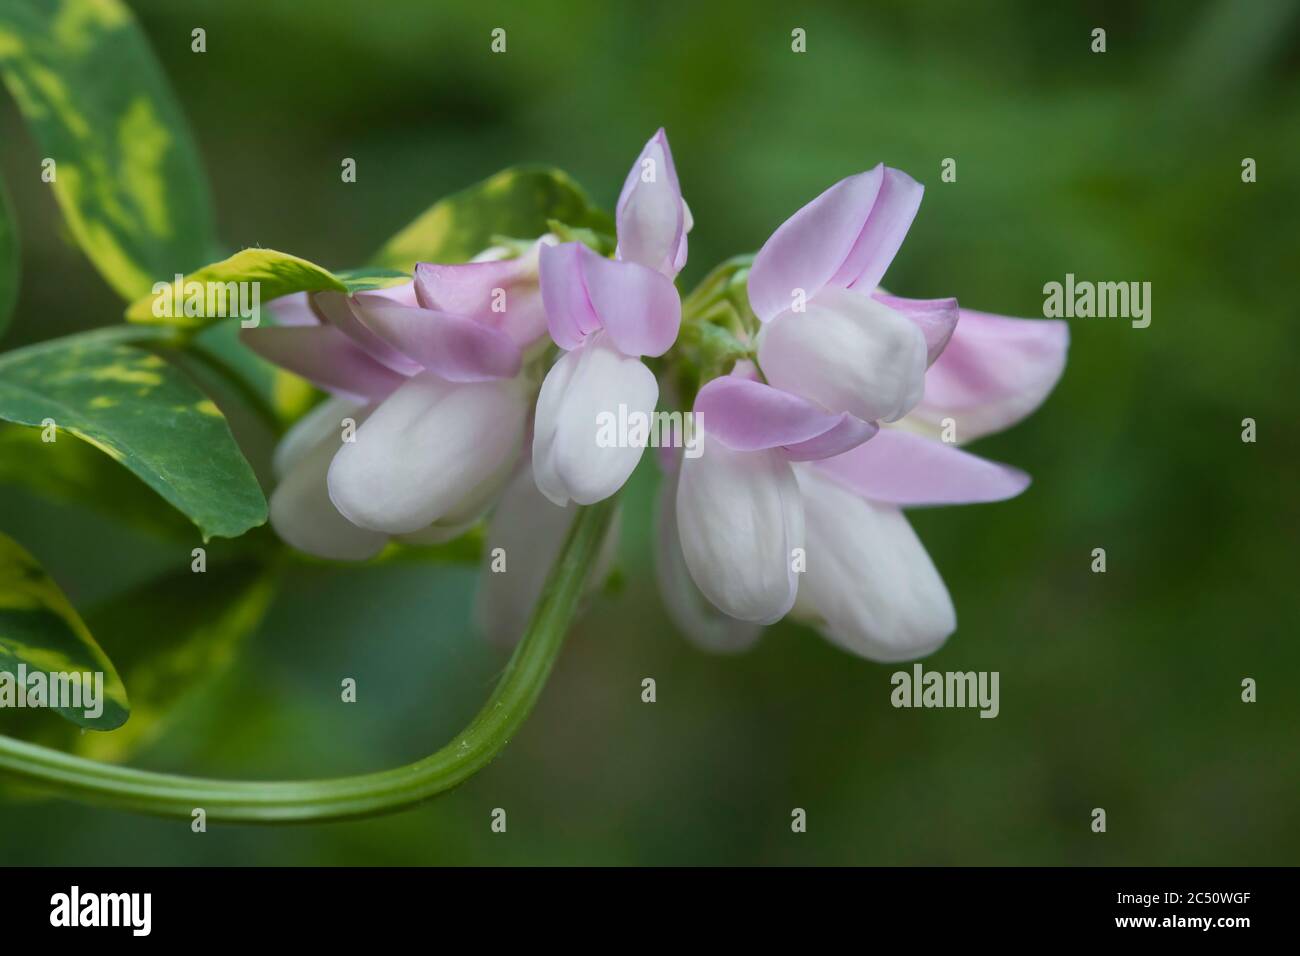 Closeup of beautiful pink flower growing outdoors. Common crownvetch. Stock Photo